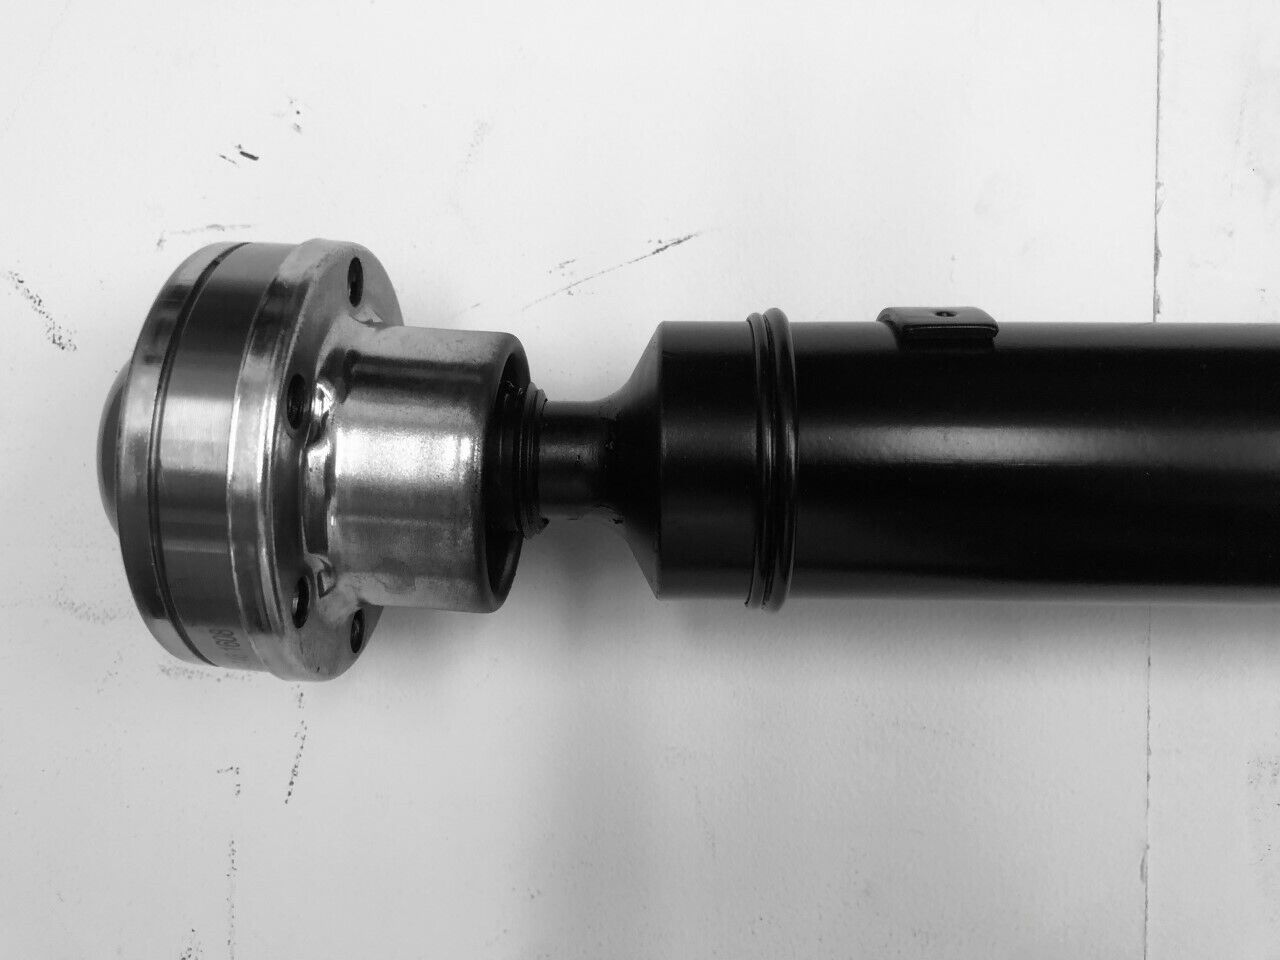 VOLVO-XC90-Propshaft-New-Replaces-OE-Part-30783345-175644354387-2